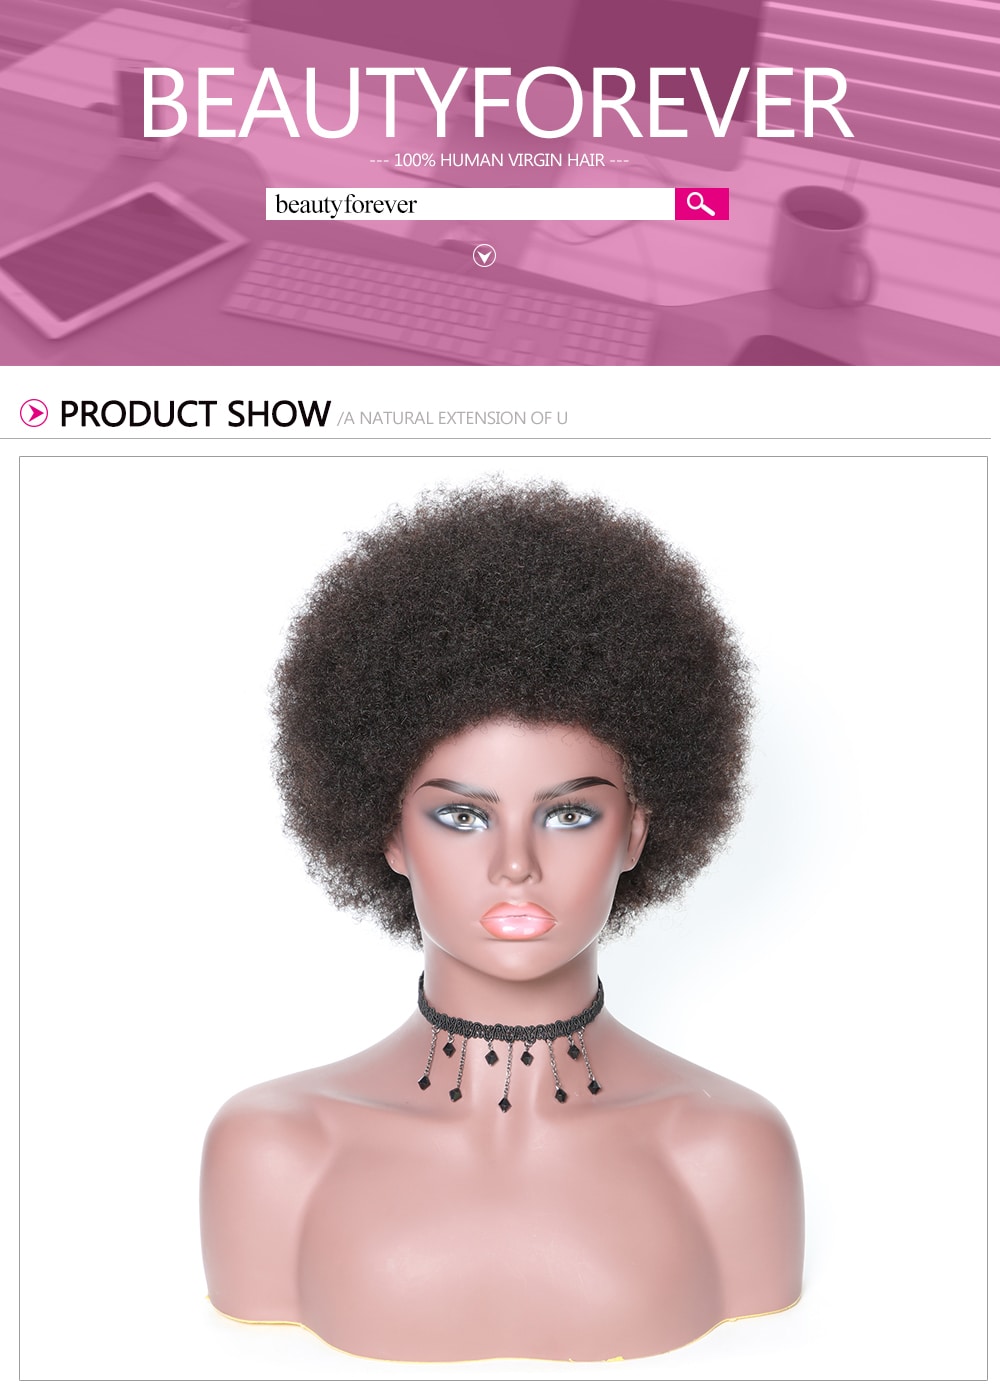 Beautyforever Lace Front Short Human Hair Curly Afro Wigs On Sale